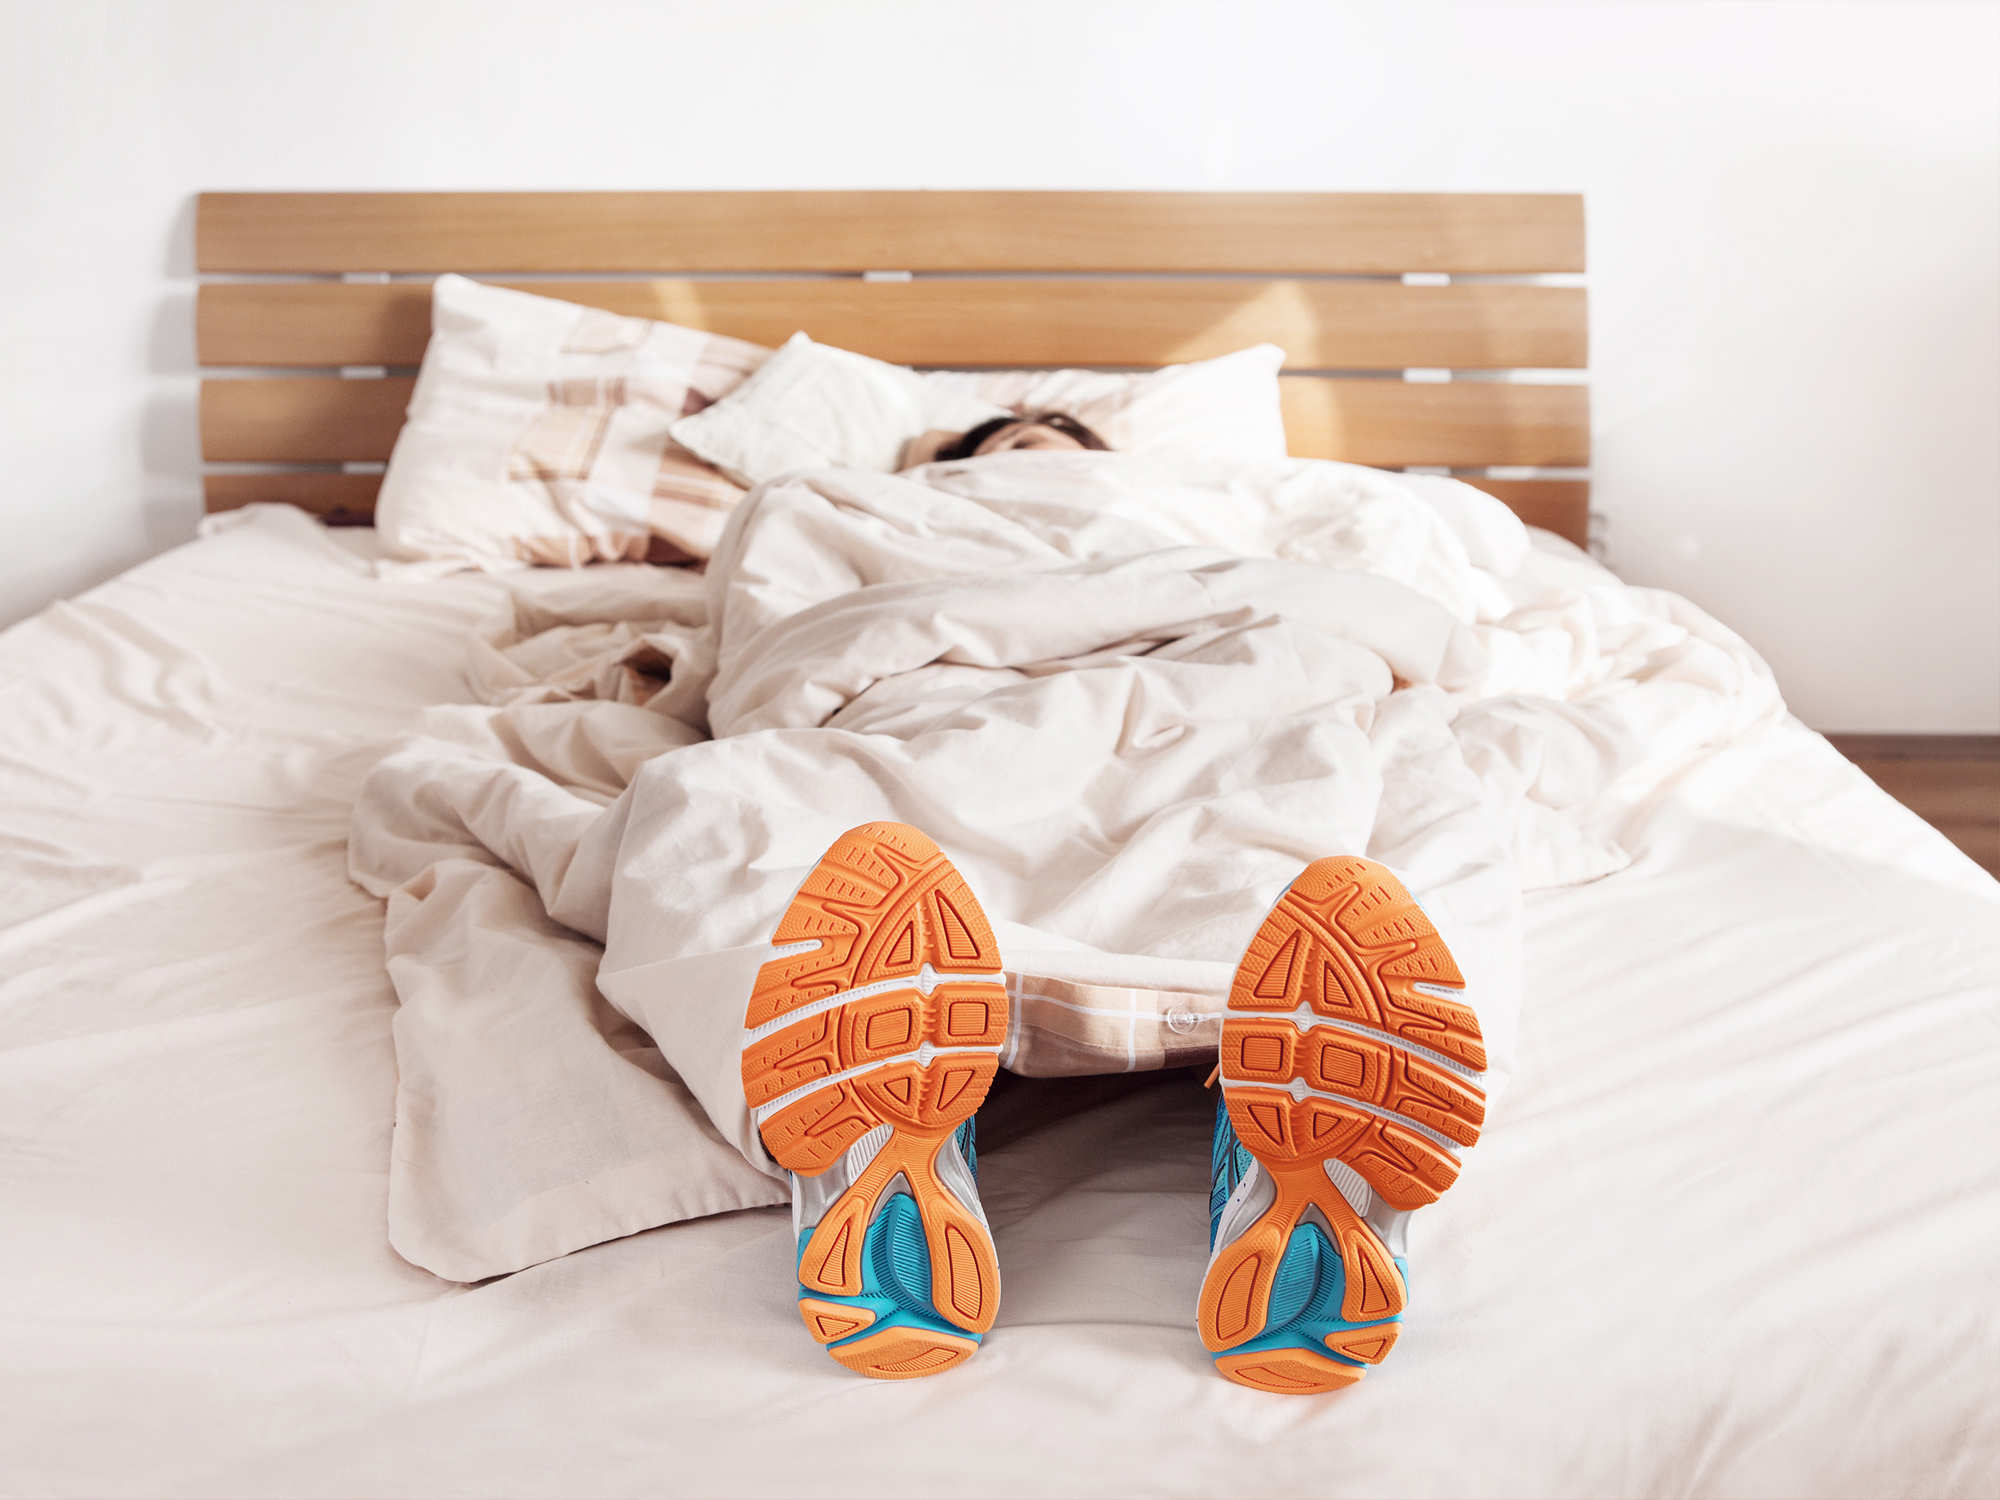 Does evening exercise really ruin your sleep?